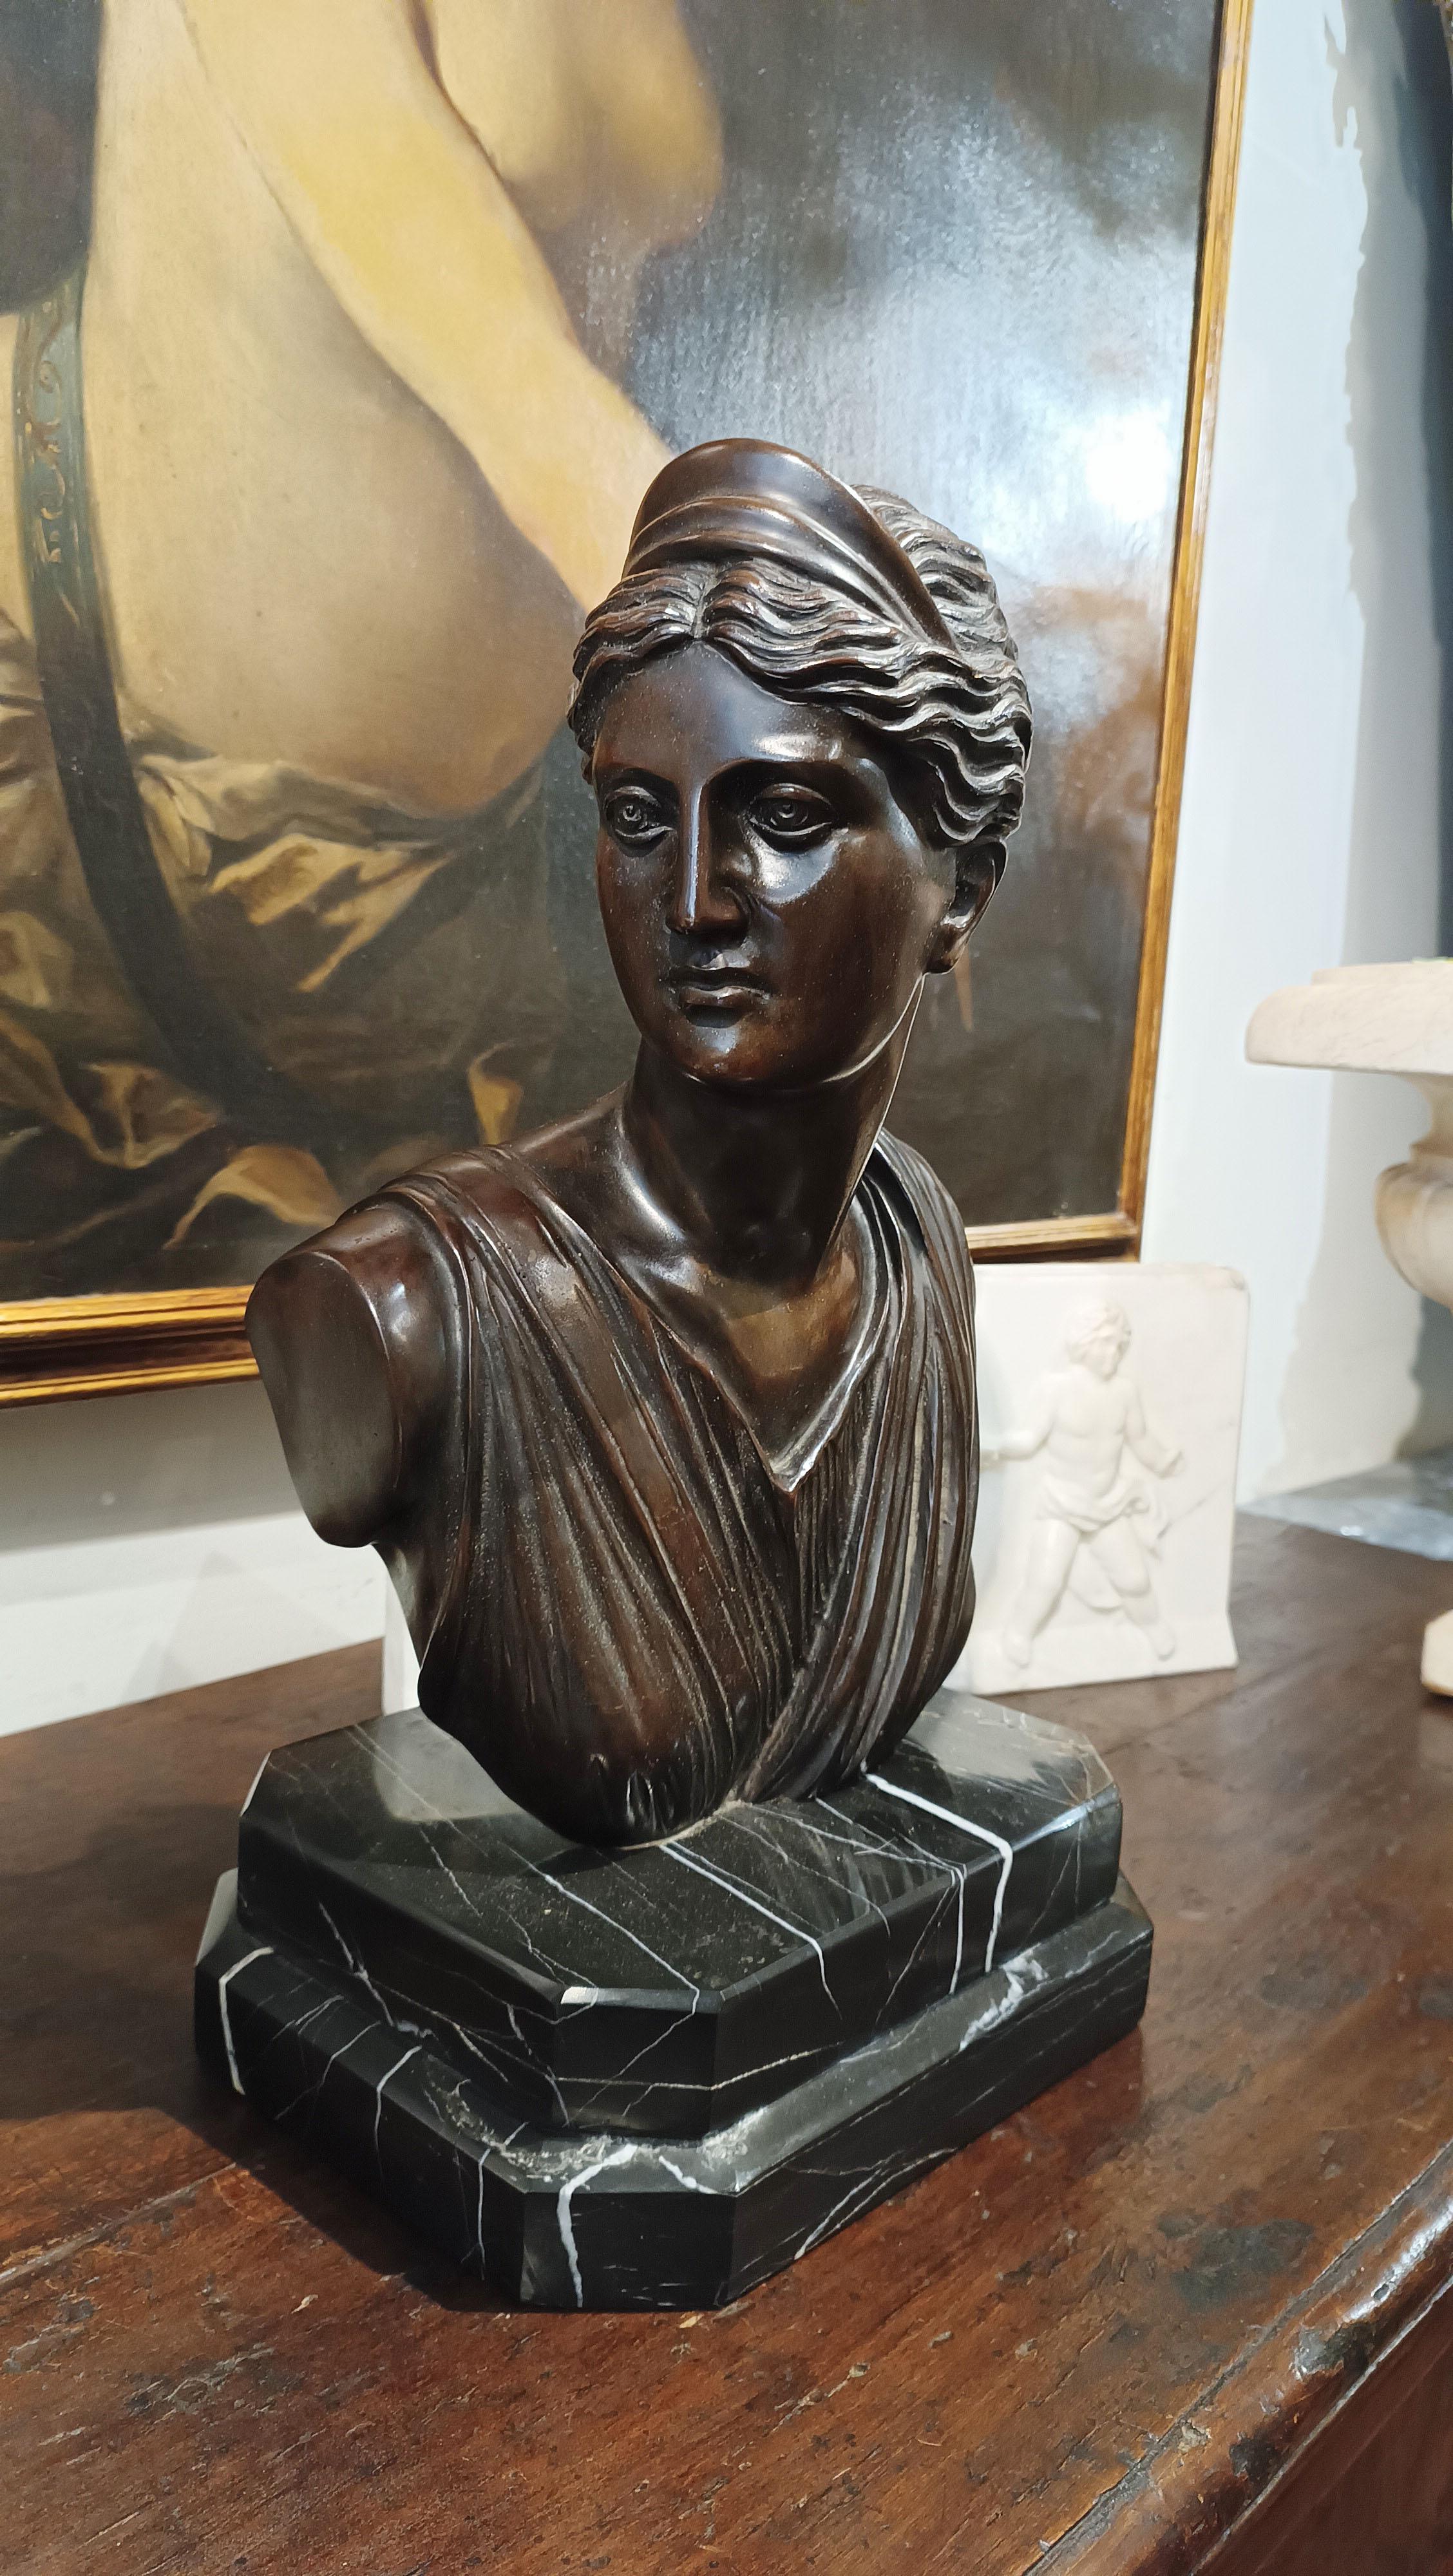 EARLY 19th CENTURY BRONZE DIANA'S BUST SCULPTURE 1